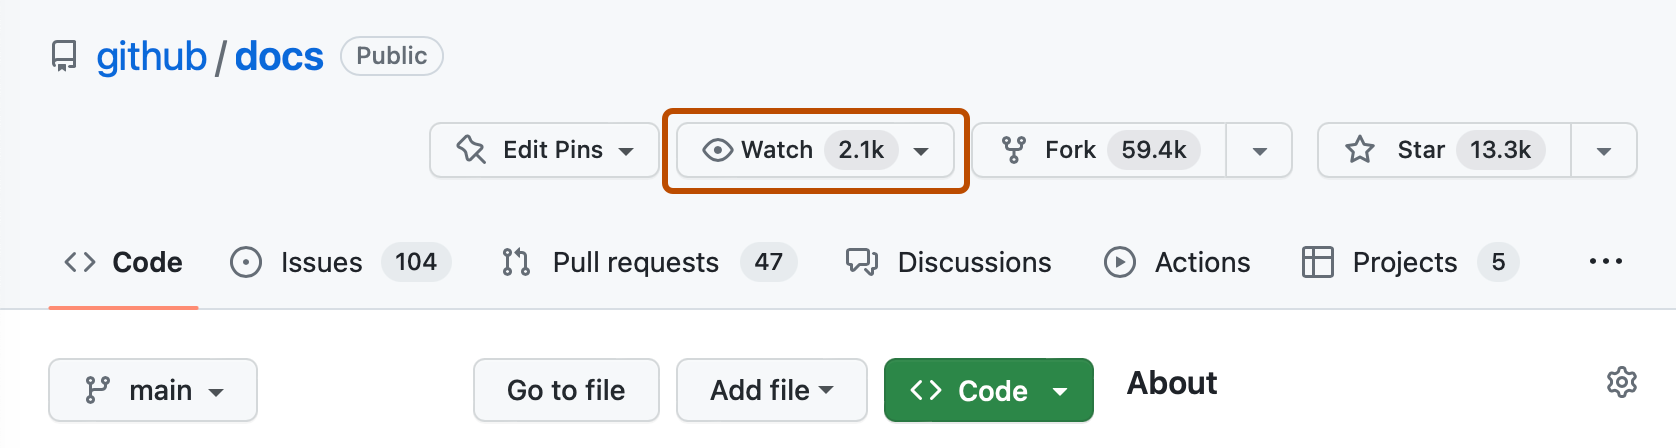 Screenshot of the main page of the github/docs repository. A button, labeled with an eye icon and "Watch 2.1k", is outlined in dark orange.